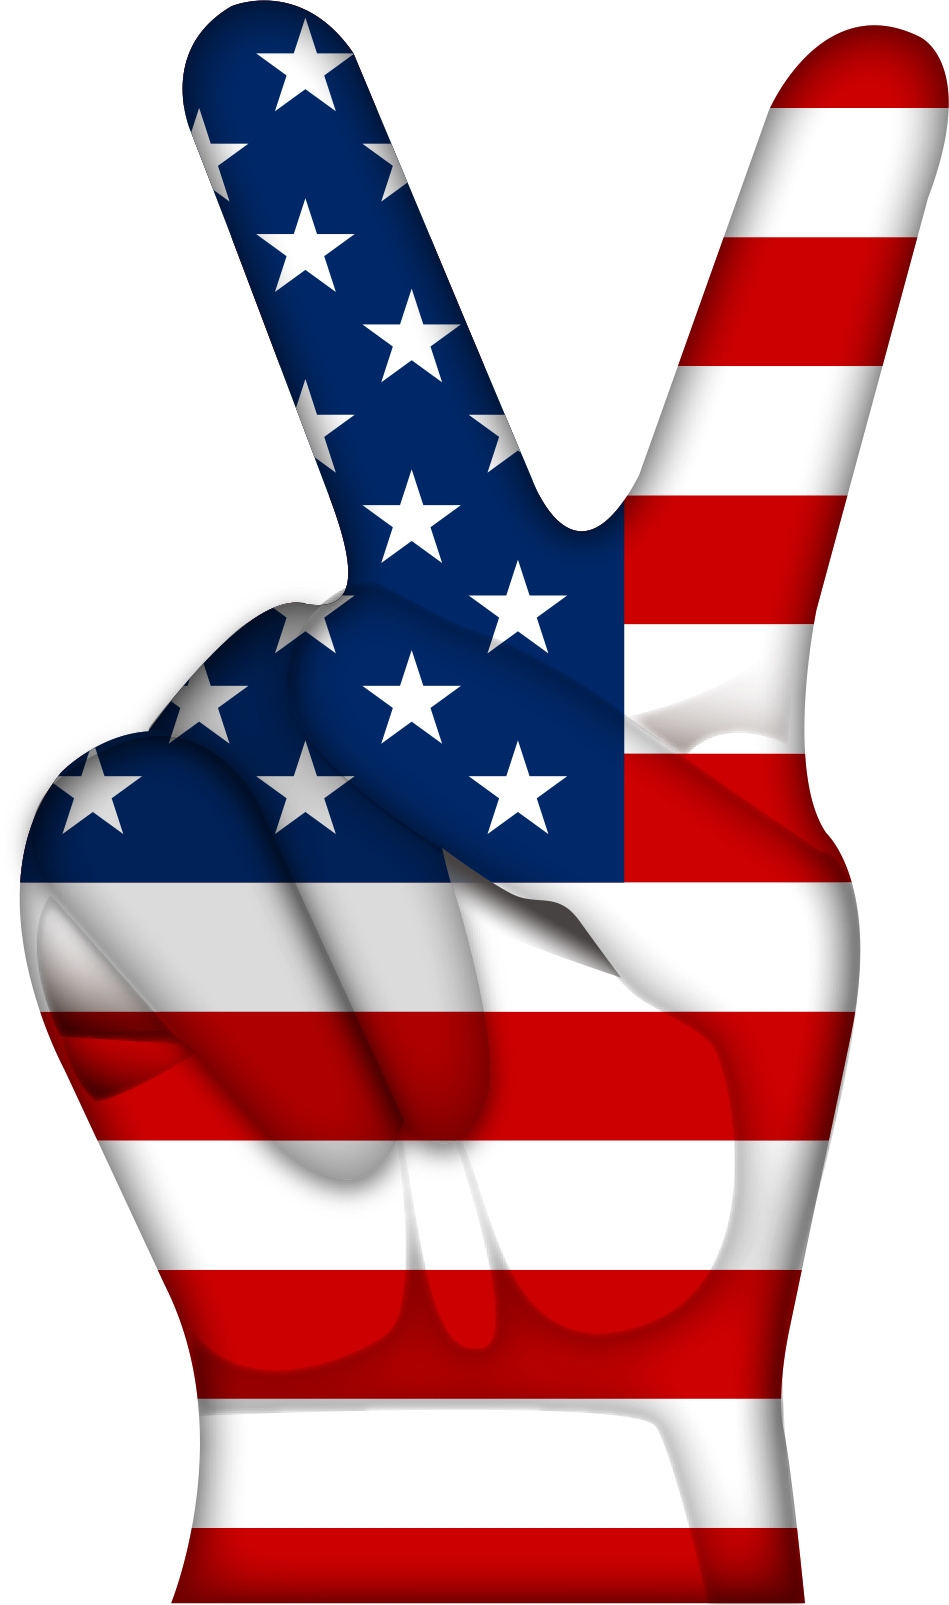 V Sign Computer File - Victory Sign Made Of American Flag Shower Curtain (949x1605)